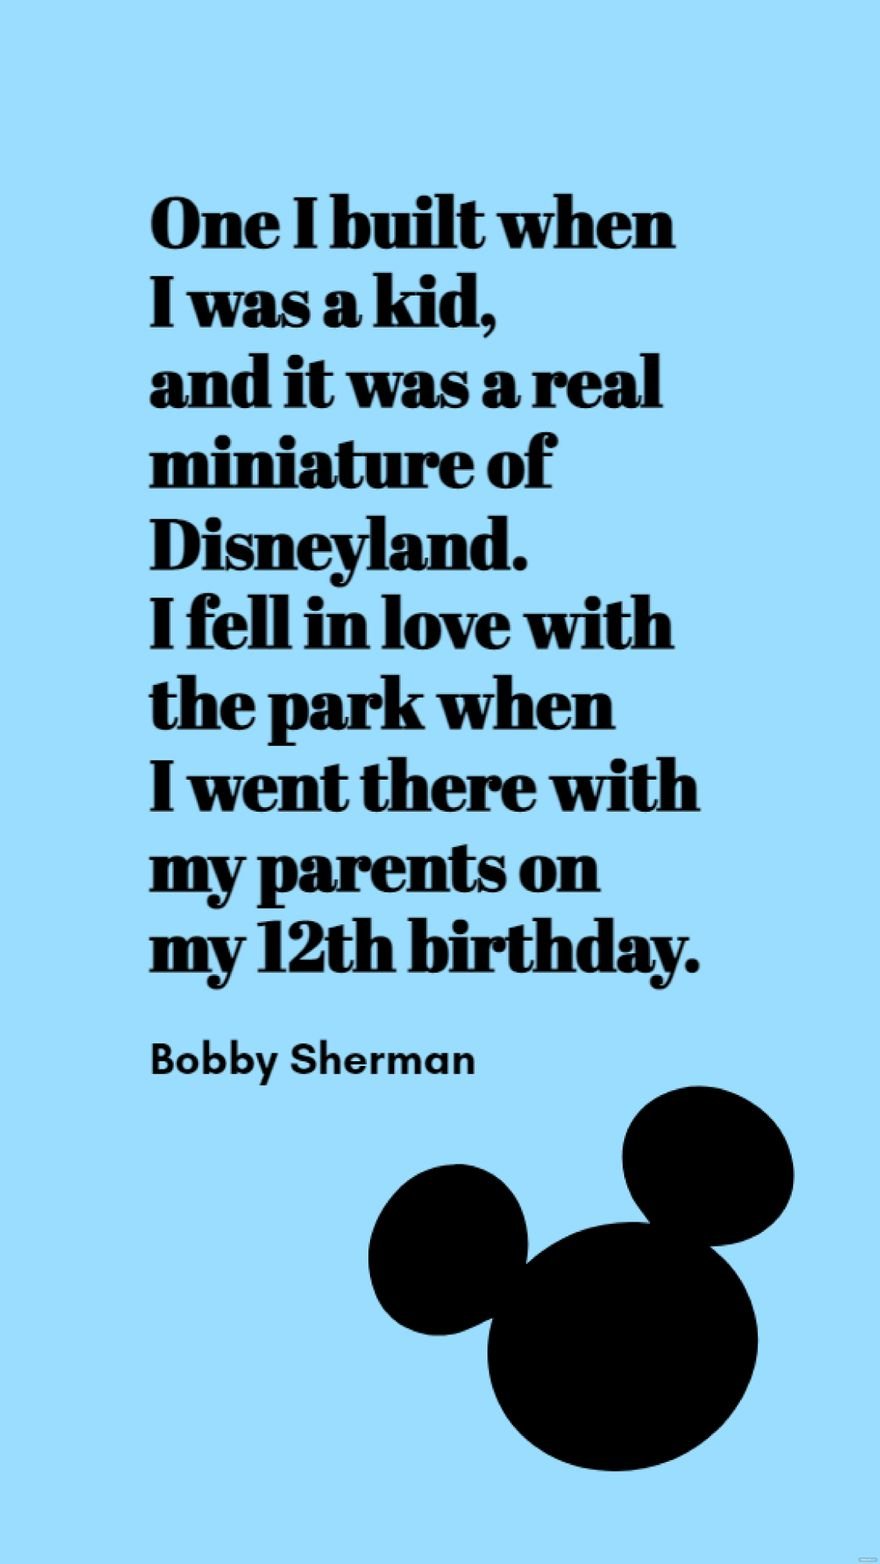 Free Bobby Sherman - One I built when I was a kid, and it was a real miniature of Disneyland. I fell in love with the park when I went there with my parents on my 12th birthday. in JPG